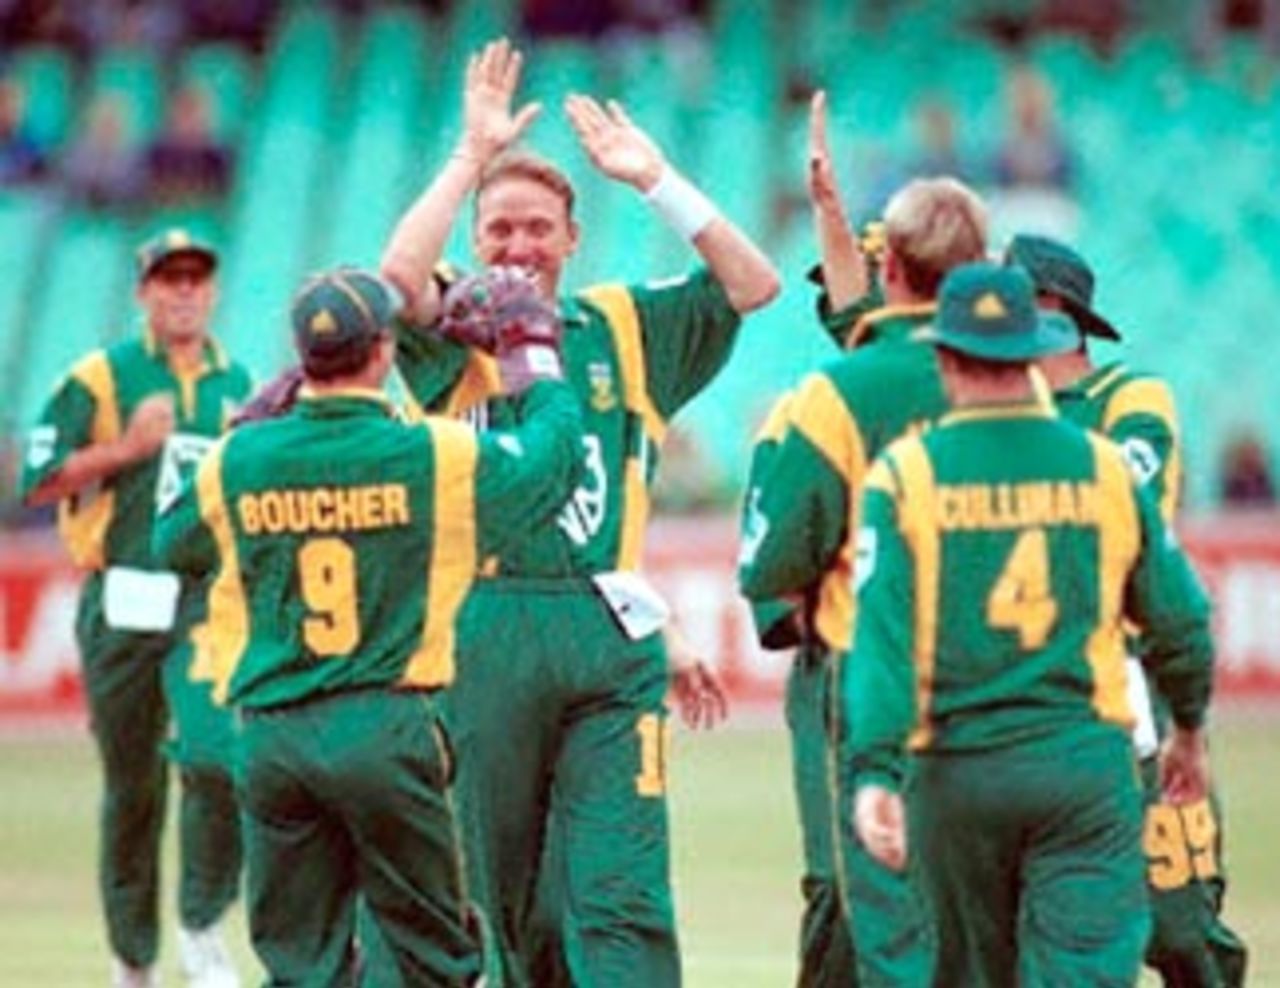 South African pace bowler Allan Donald (C) celebrates the wicket of New Zealand opener Nathan Astle who was caught behind by Jacques Kallis at Durban's Kingsmead Cricket stadium 01 November 2000 during the fifth, one-day international cricket series between New Zealand and South Africa